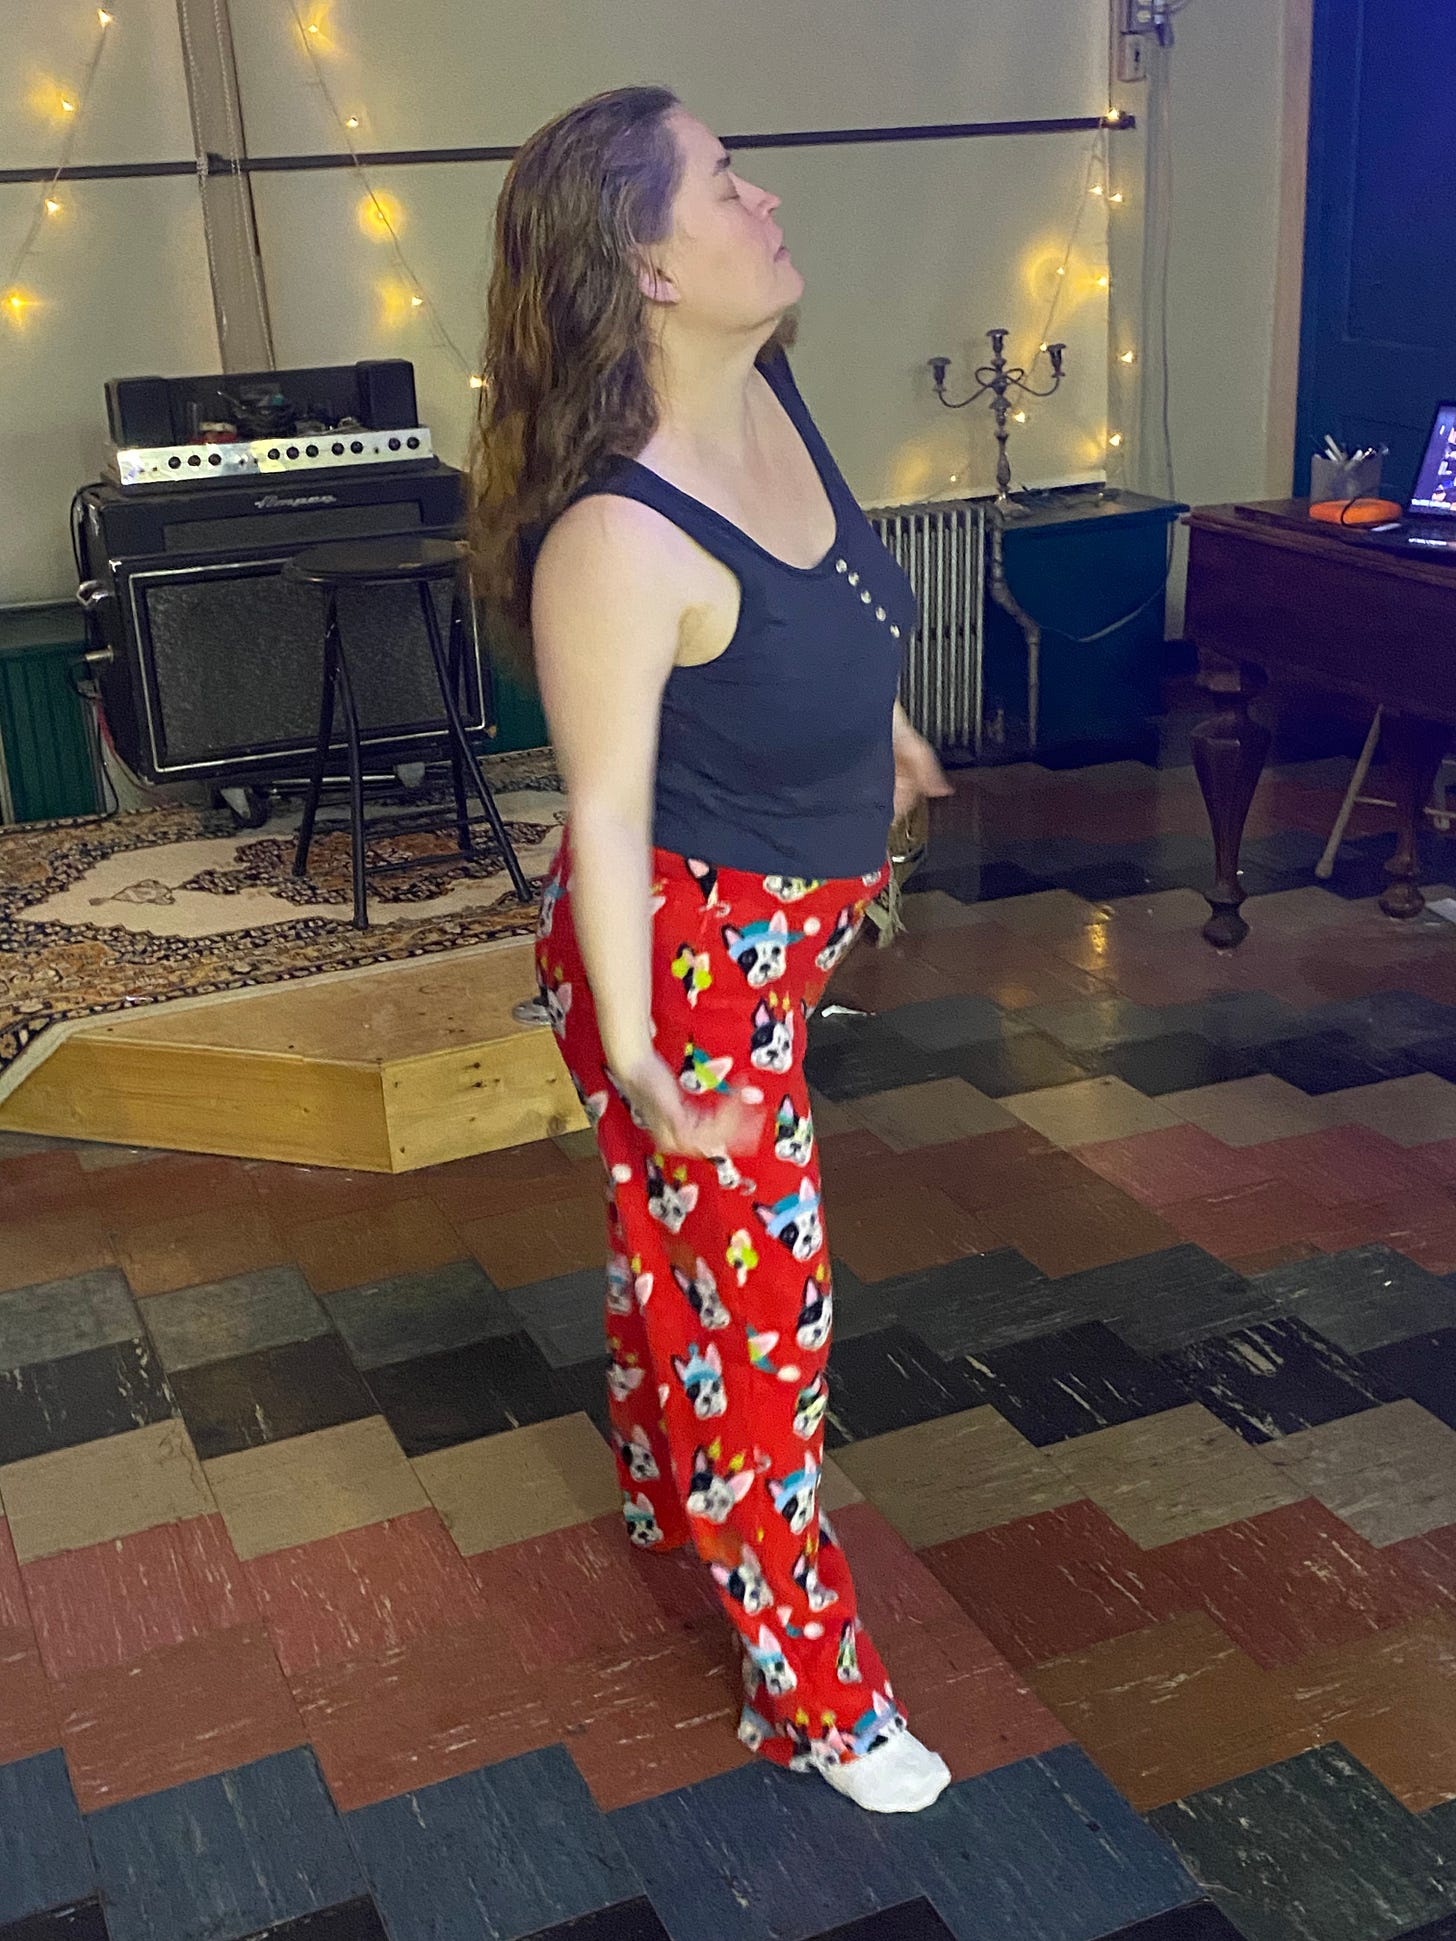 A femme presenting person dancing in a studio in red fuzzy pajama pants and a tank top